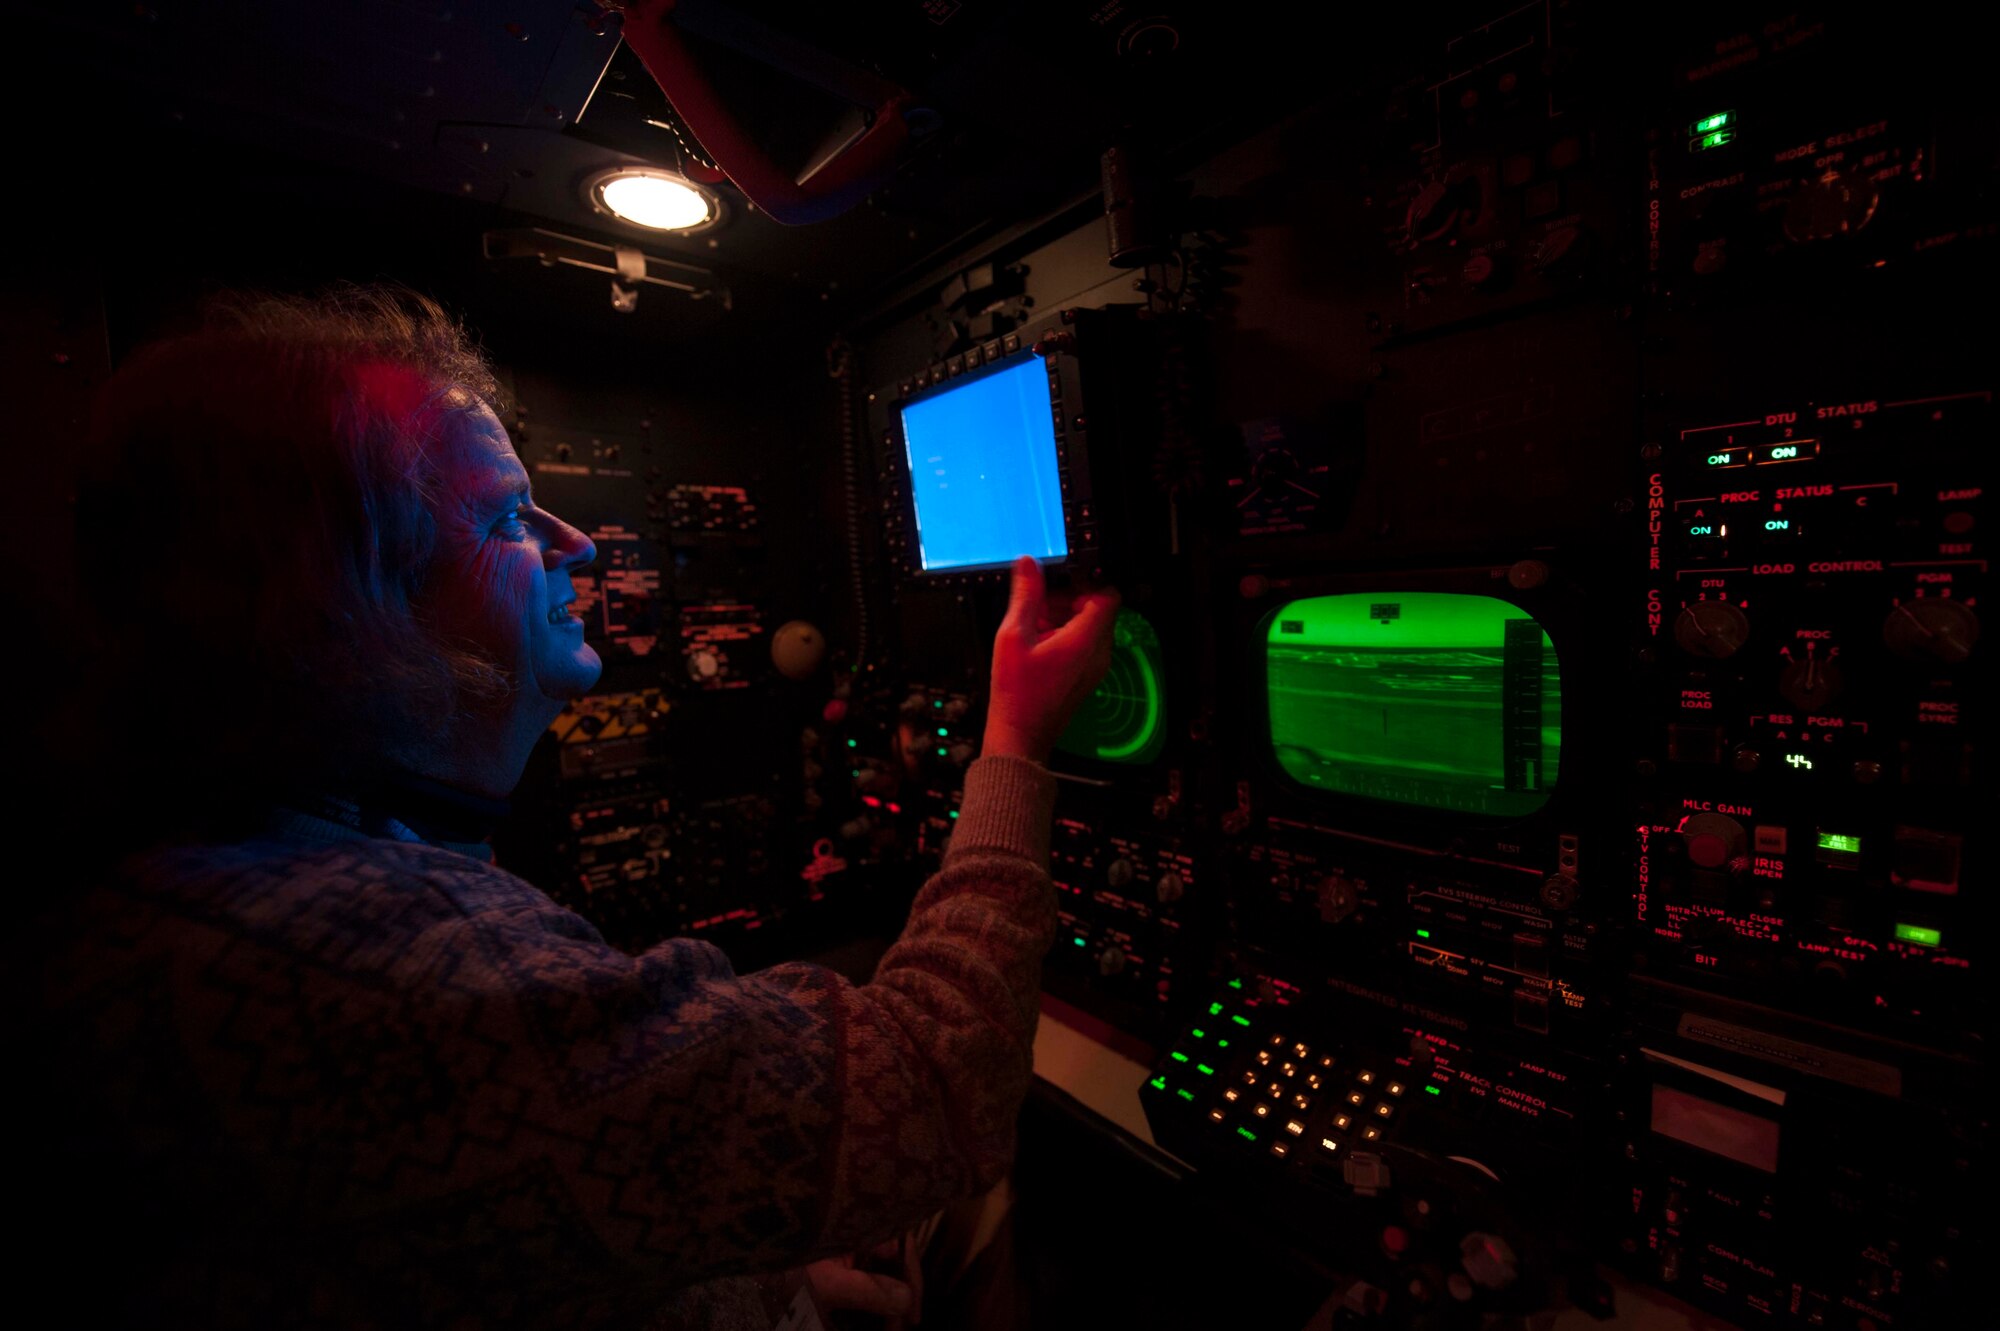 James Wuensch, 5th Operations Support Squadron contractor and system operator, adjusts a screen in the navigator simulator on Minot Air Force Base, N.D., Dec. 3, 2014. The navigator simulator is located next to the B52-H Stratofortress weapons system trainer and allows flight crews to simulate combat scenarios and prepare for real world combat. (U.S. Air Force photo/Senior Airman Stephanie Morris)